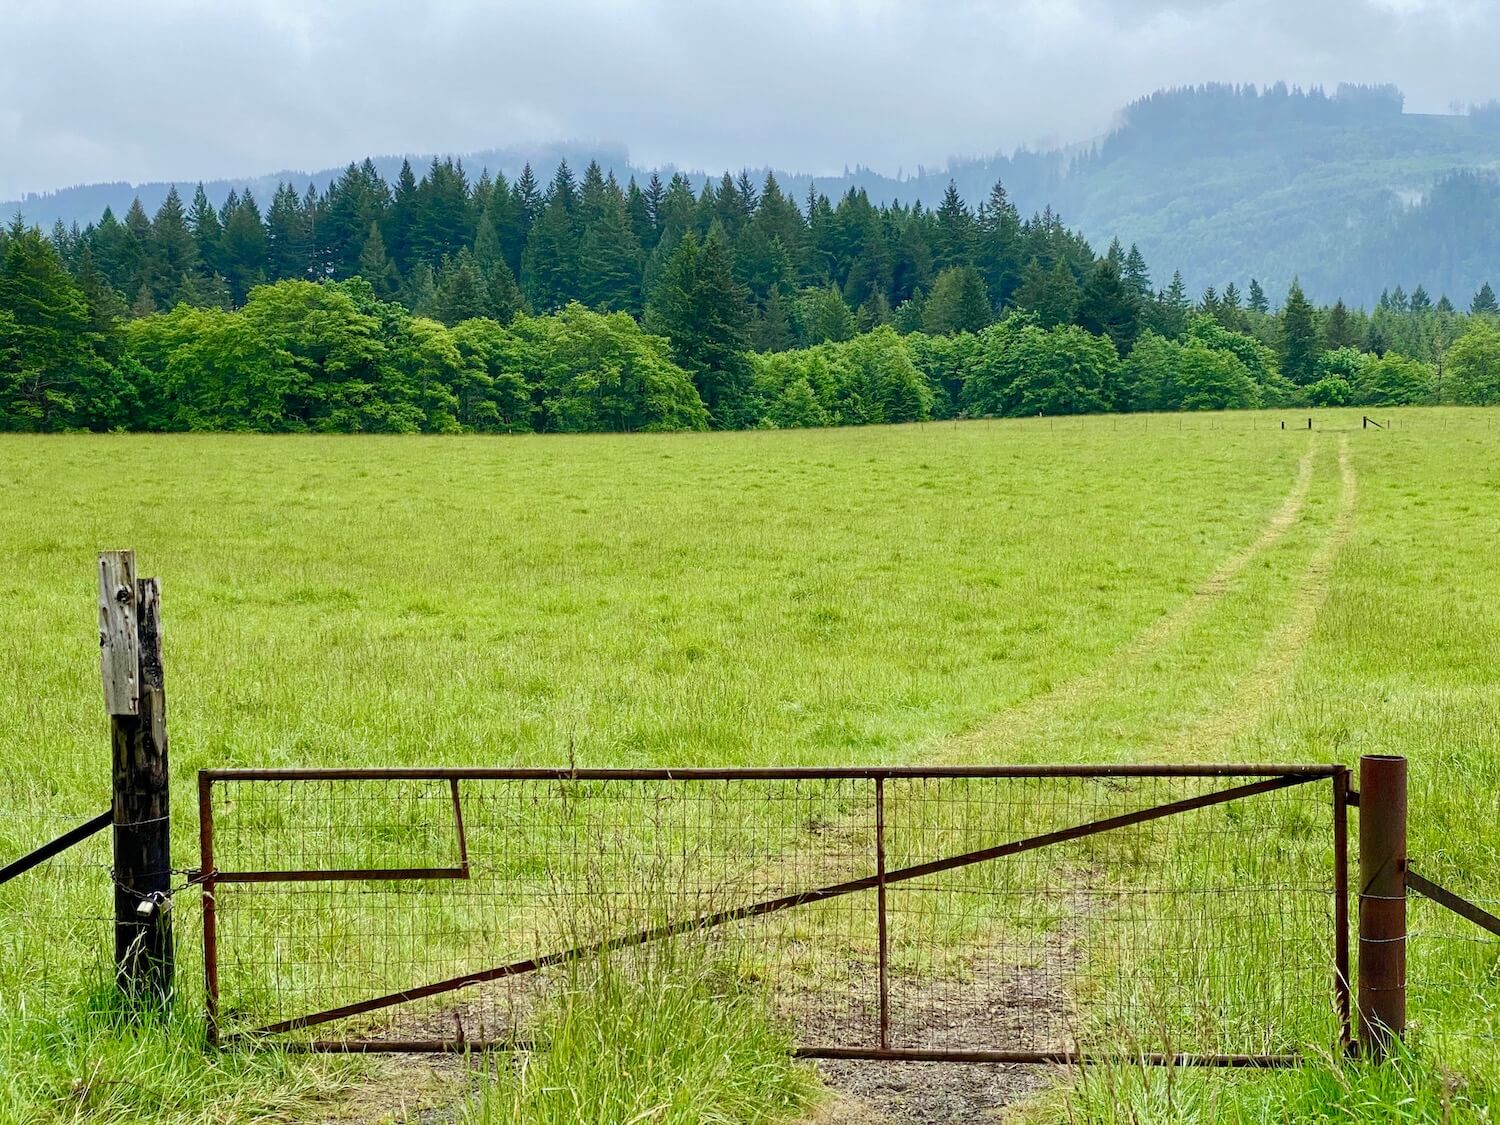 Driving along highway 503 on a visit to Mount St. Helens offers variations in scenery, including this open farm meadow of bright green grass with a farm road matted into the field leading to another gate near a thick forest of maples and fir trees. 